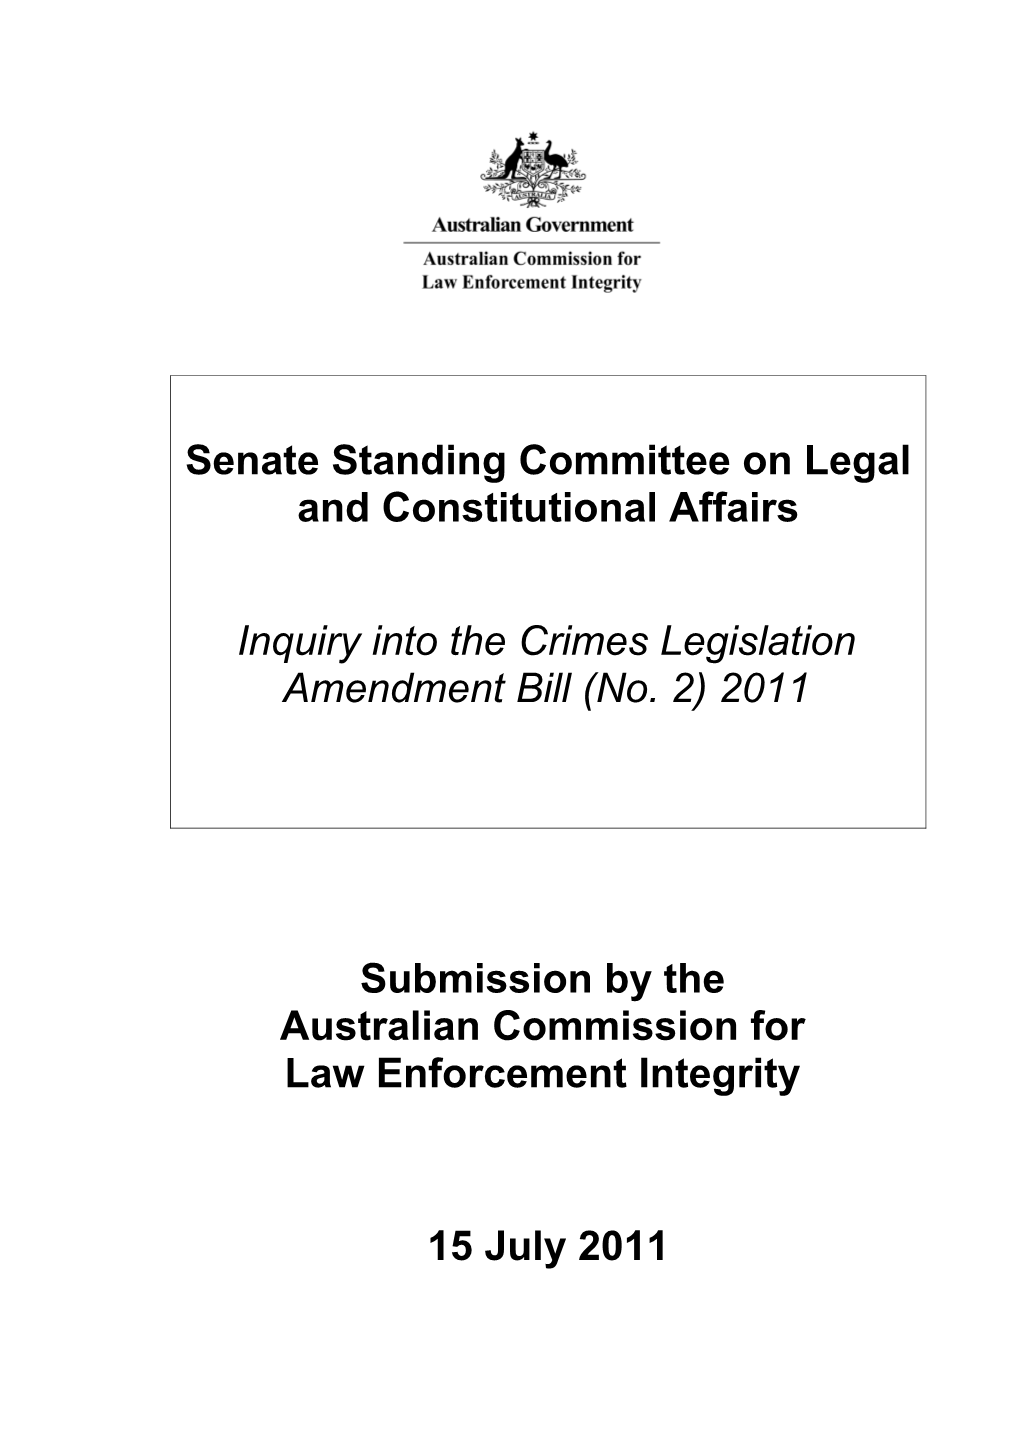 ACLEI Submission Senate Standing Committee on Constitutional Affairs - Inquiry in Crimes